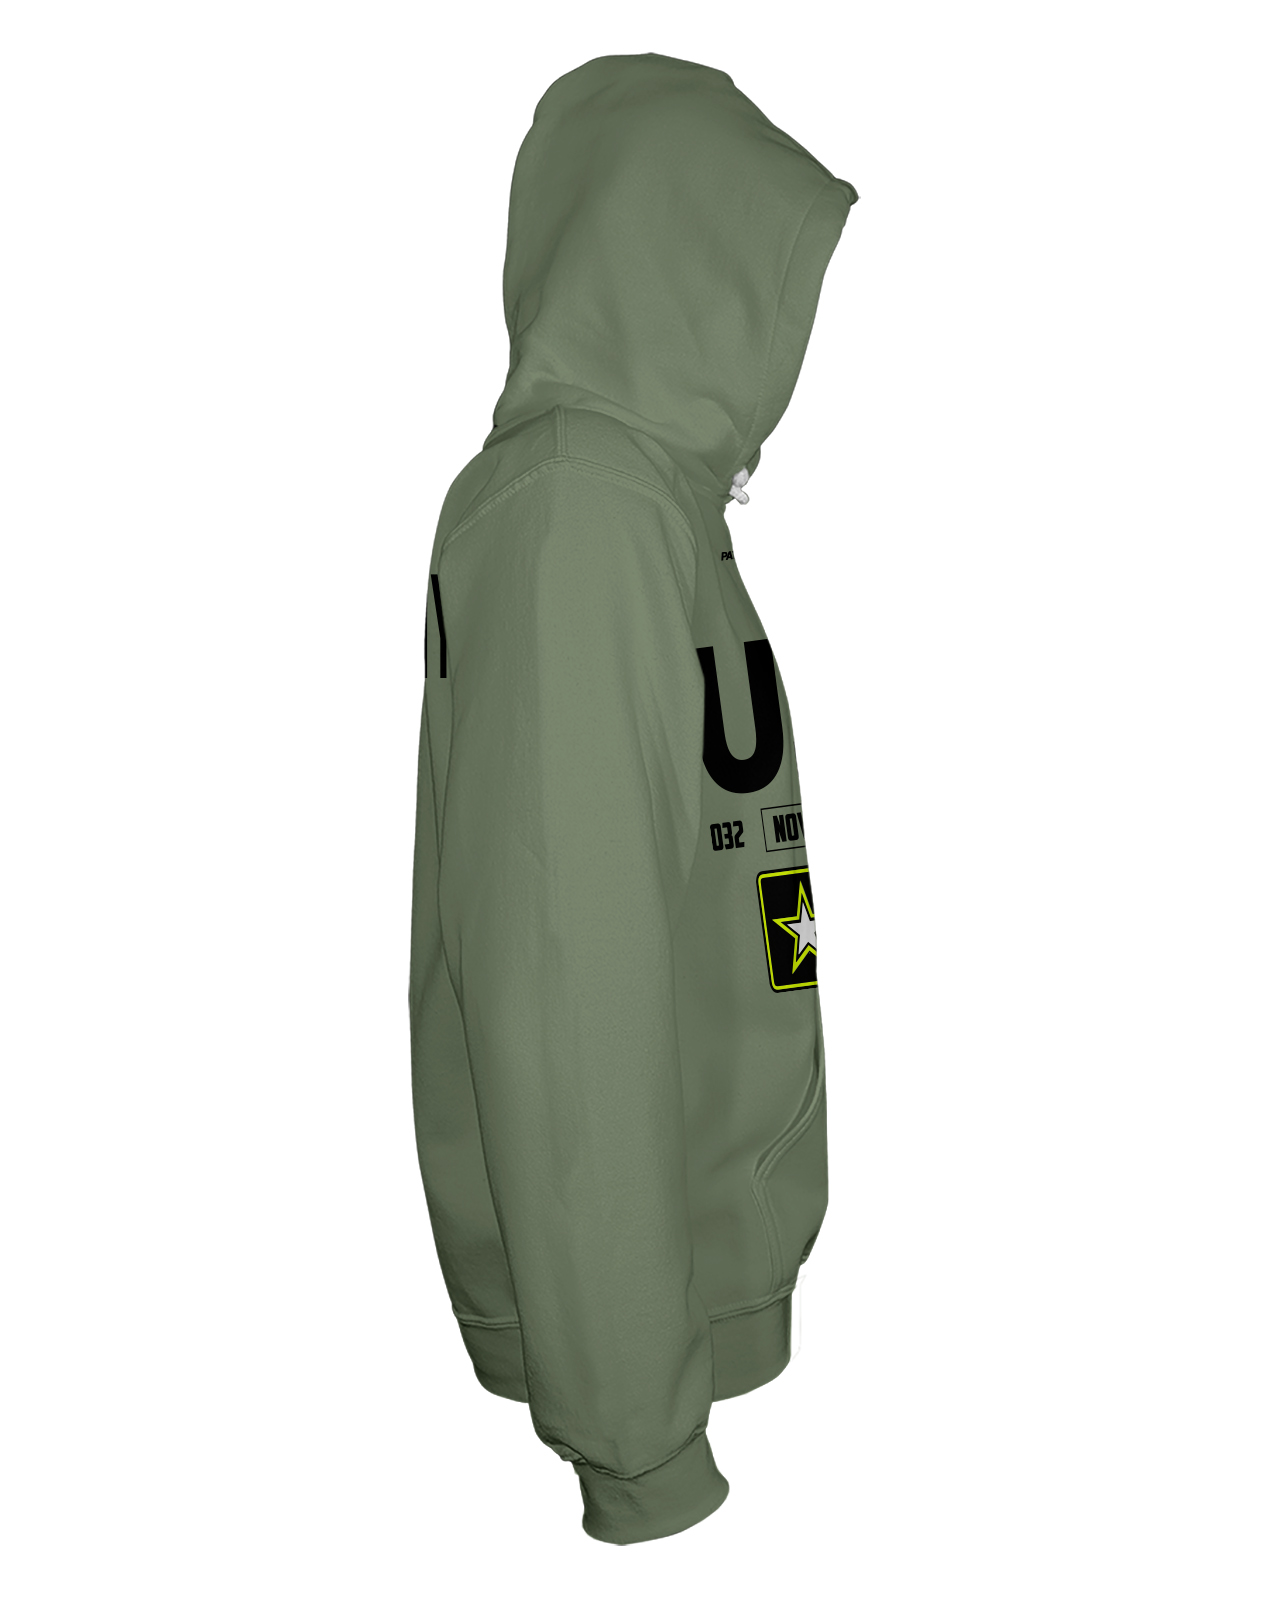   Patriot Sports  ARMY Pullover Hoodie  Side  View plain  color on the sleeve.  